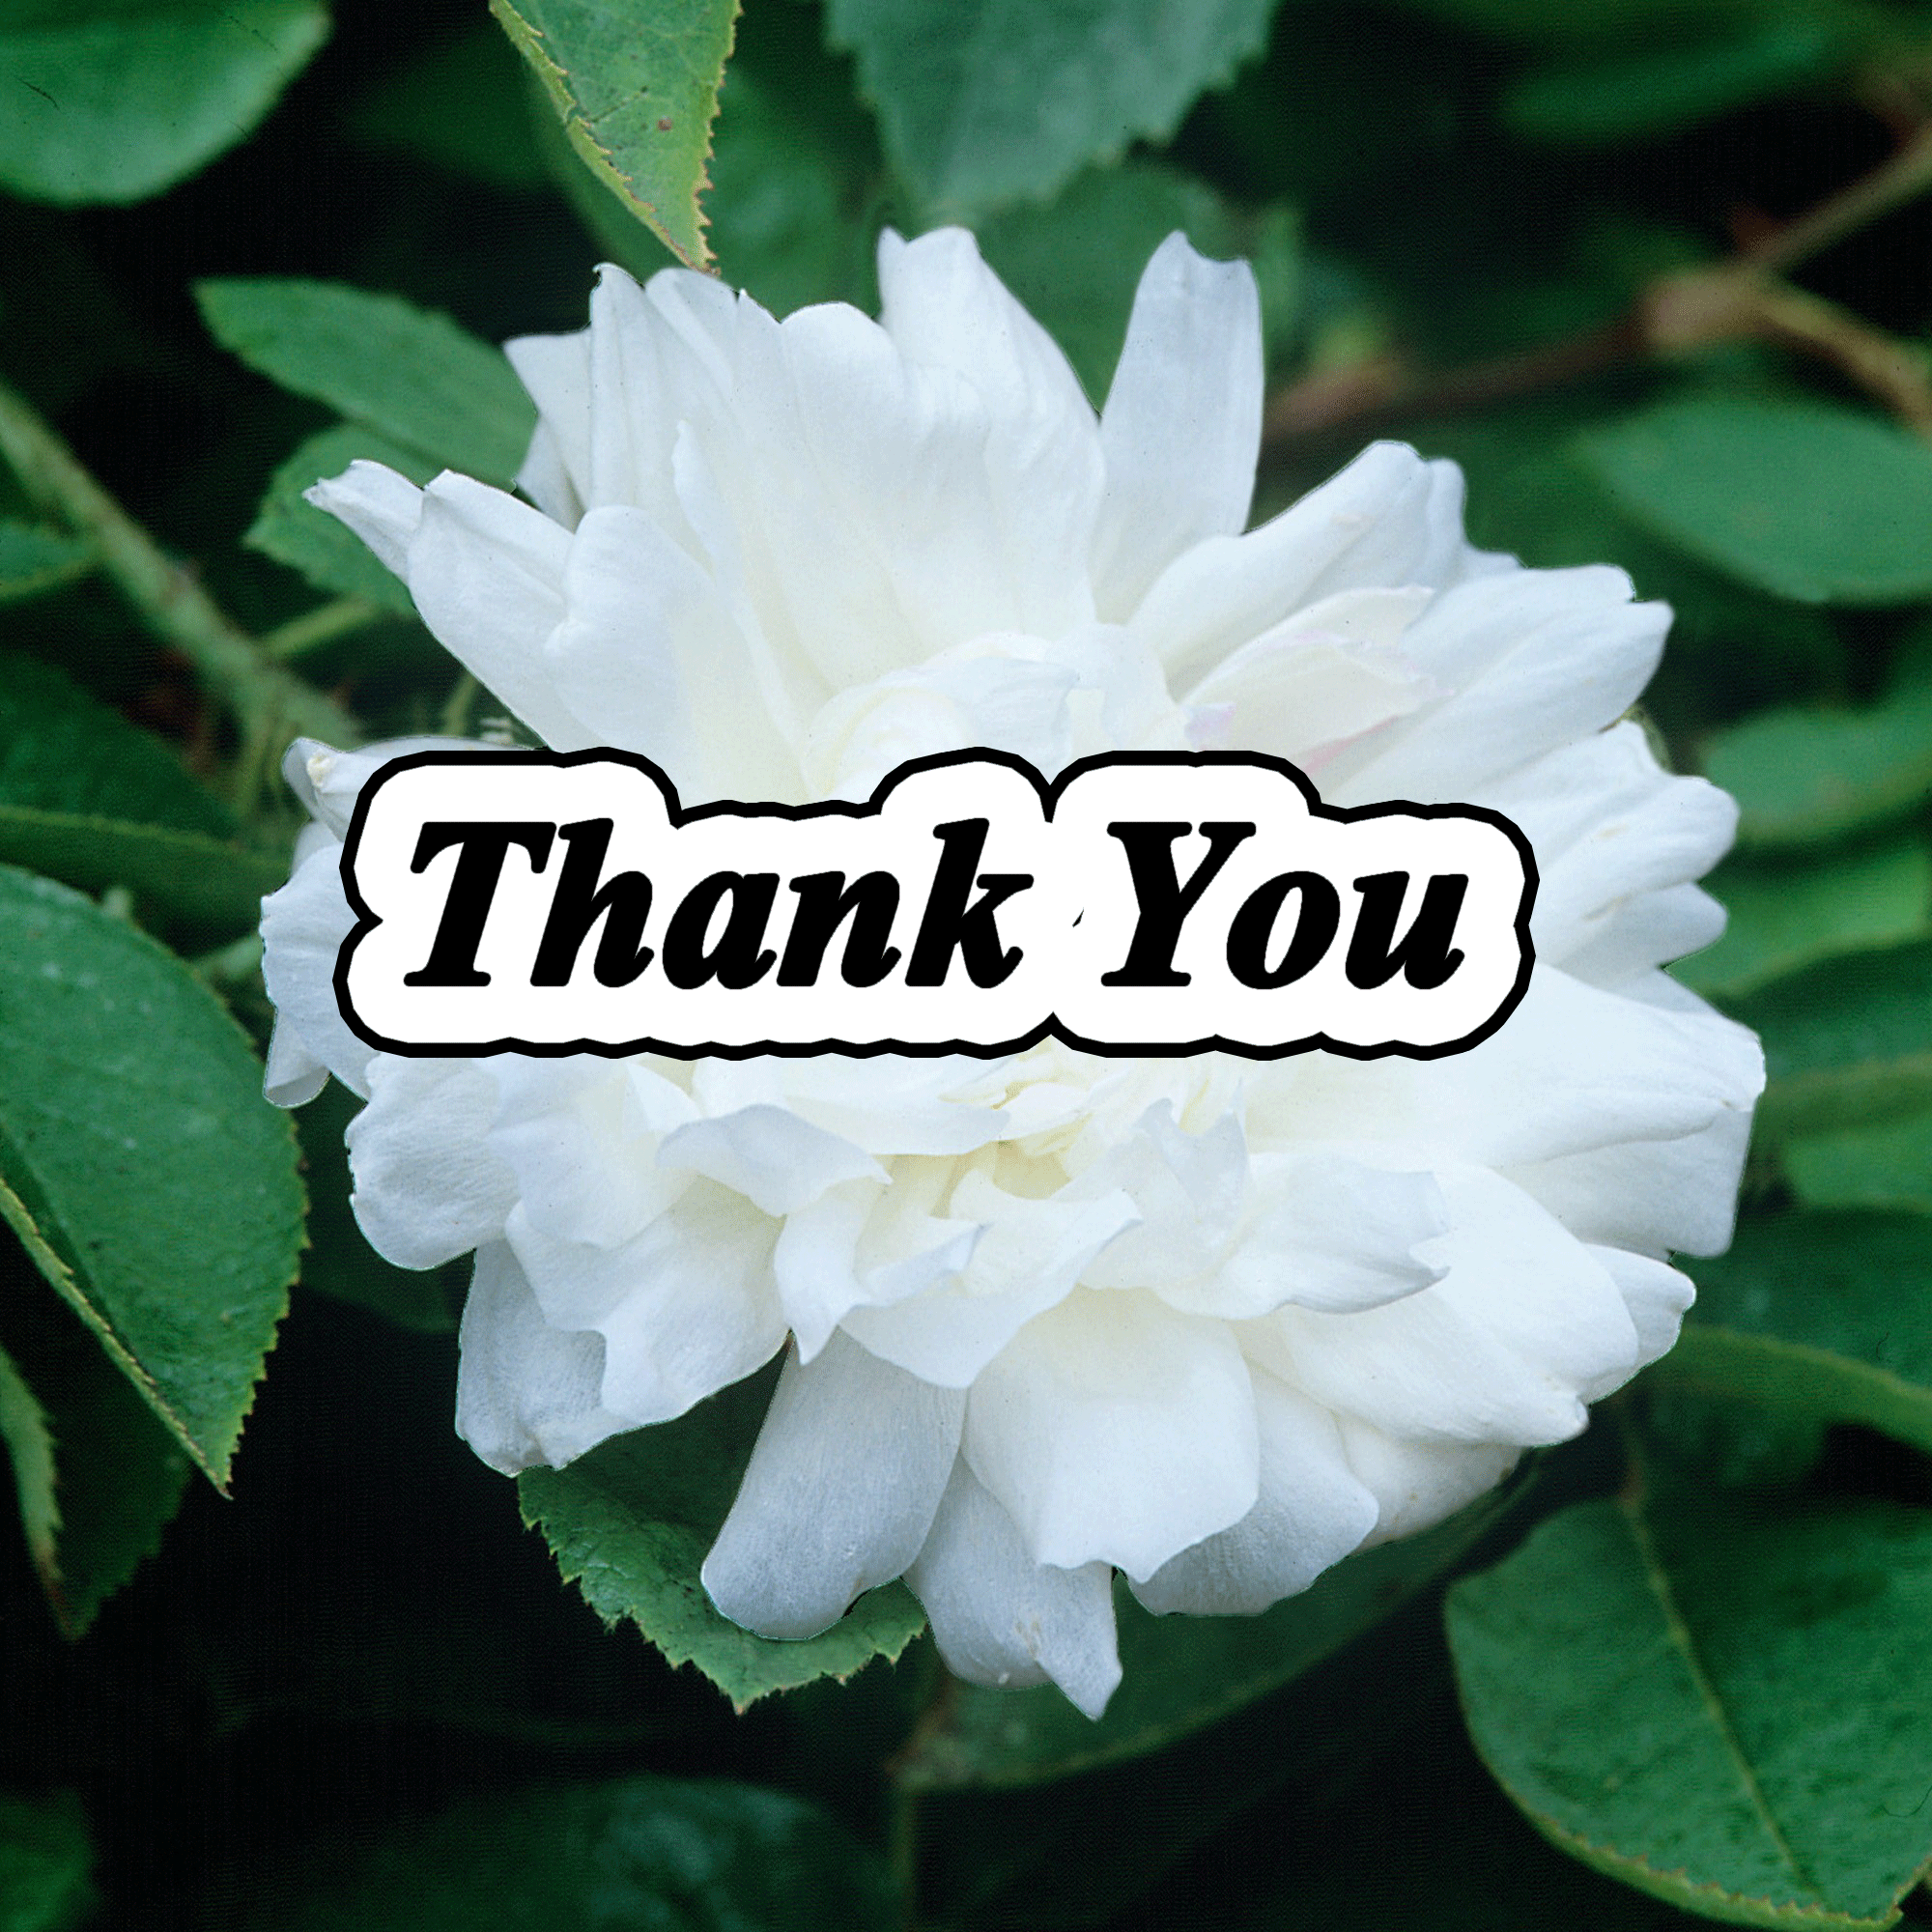 Thank you flowers image